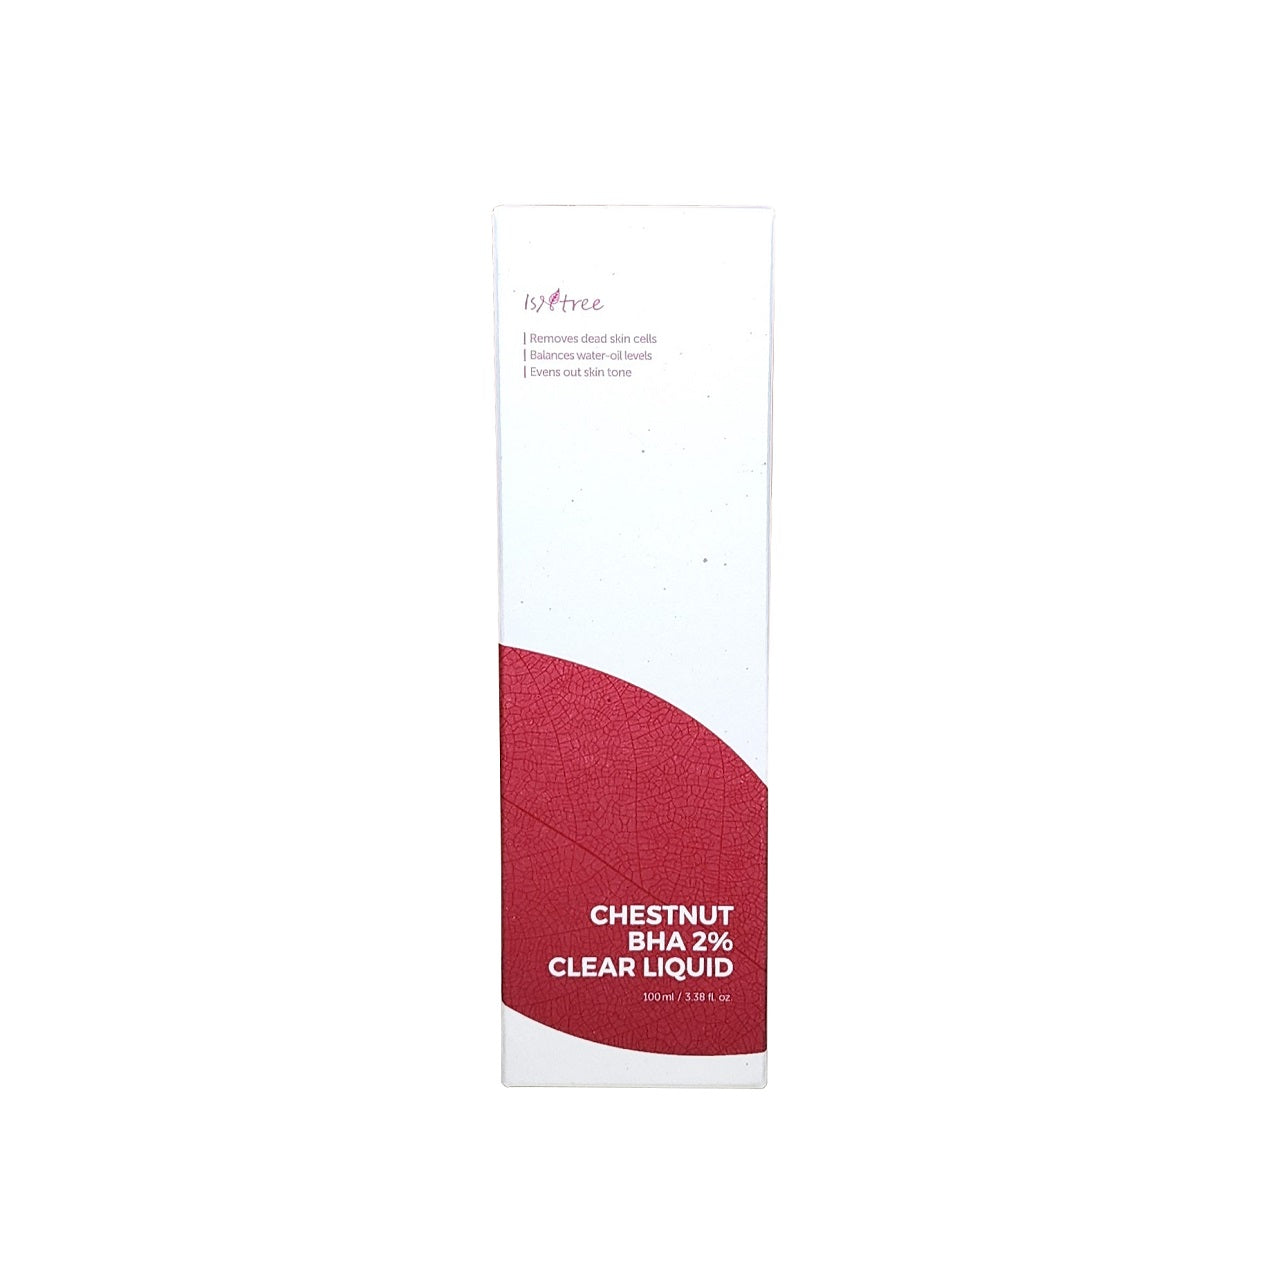 Product label for Isntree Chestnut BHA 2% Clear Liquid (100 mL)